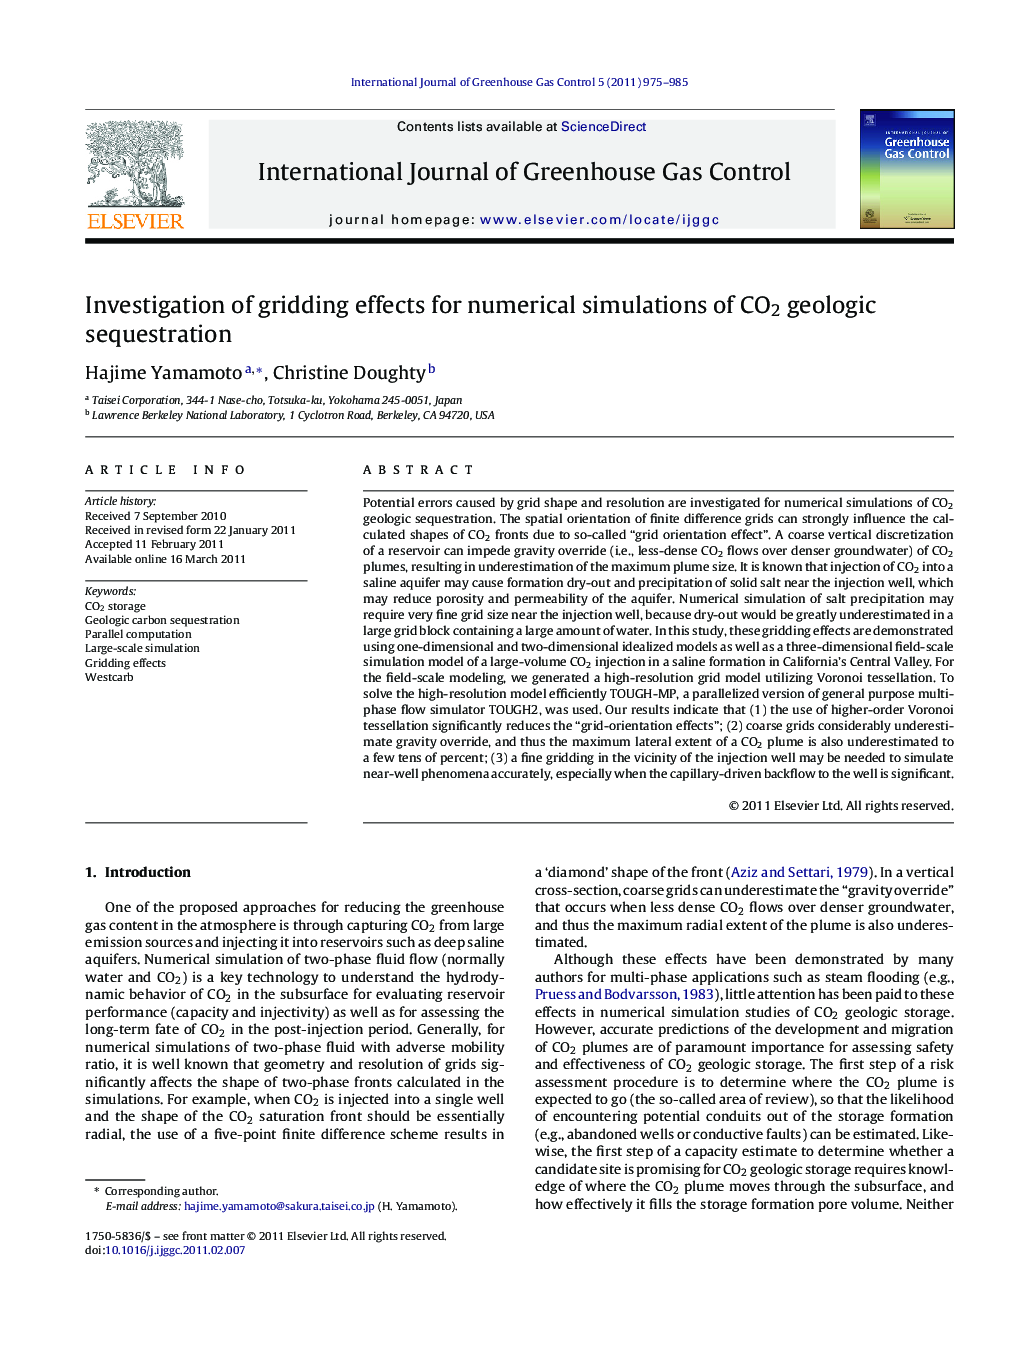 Investigation of gridding effects for numerical simulations of CO2 geologic sequestration